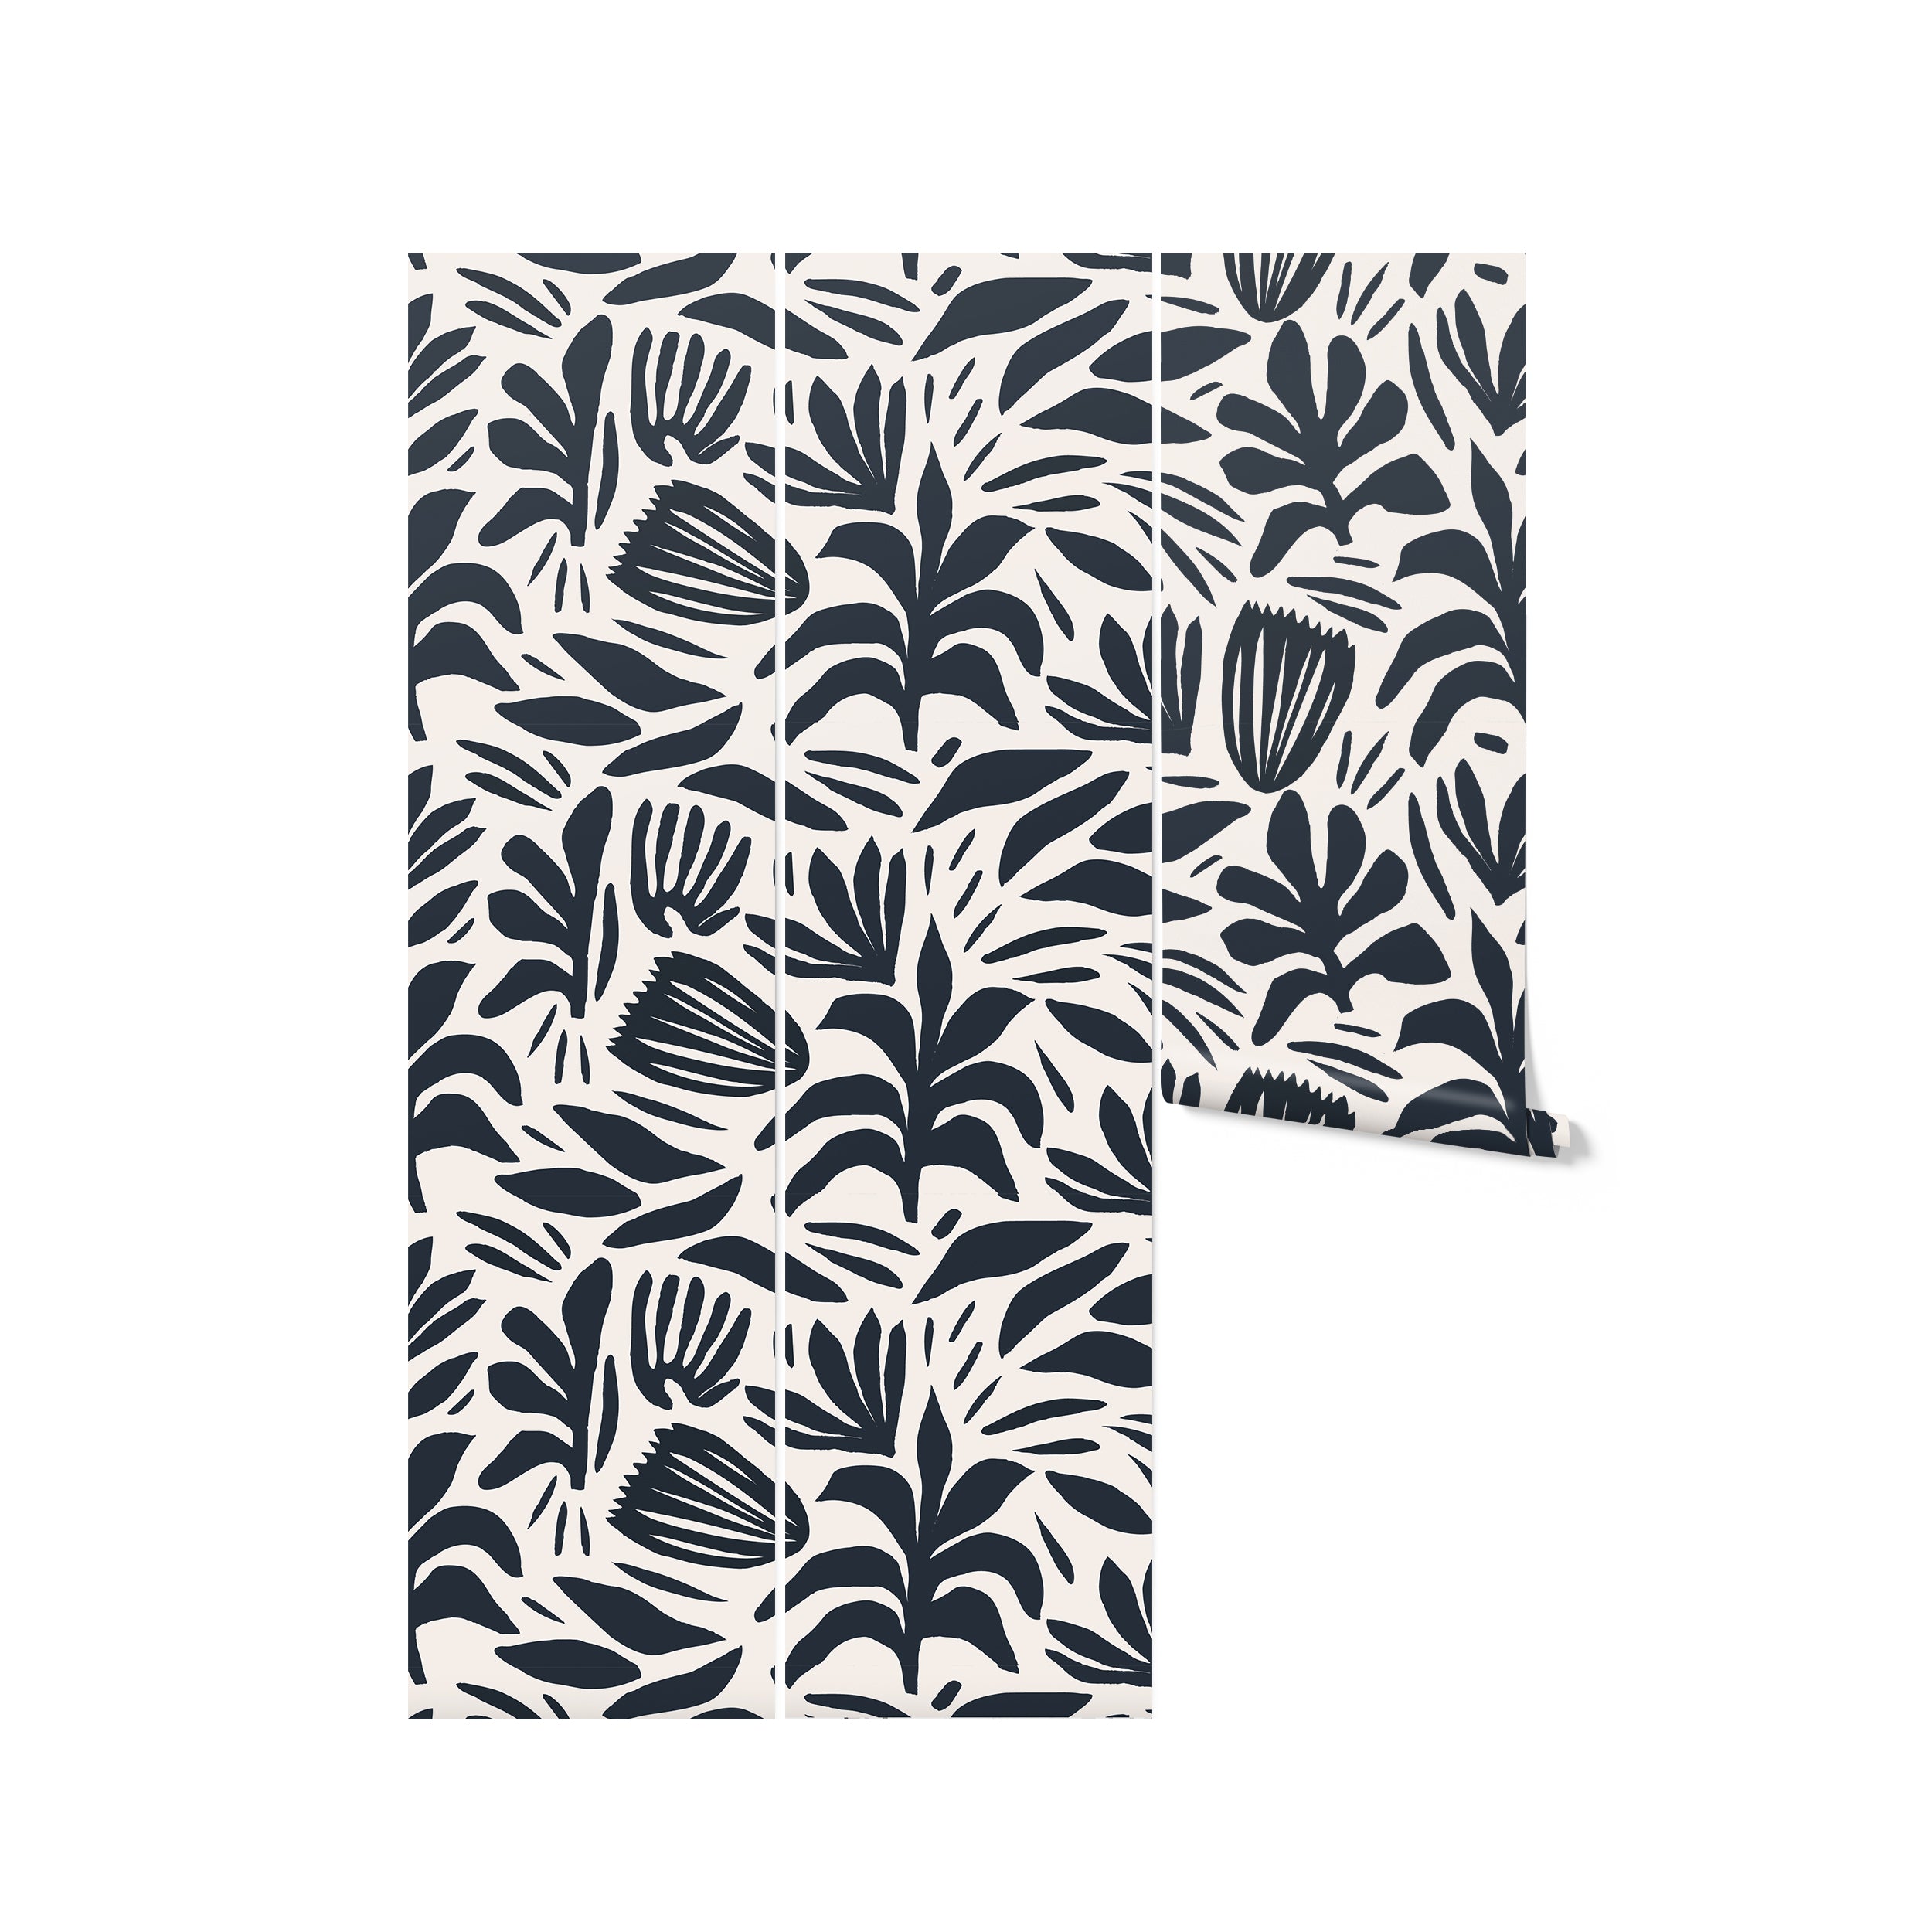 A mockup of a roll of Dark Bloom Wallpaper, displaying the bold black abstract floral and leaf design on a white background.